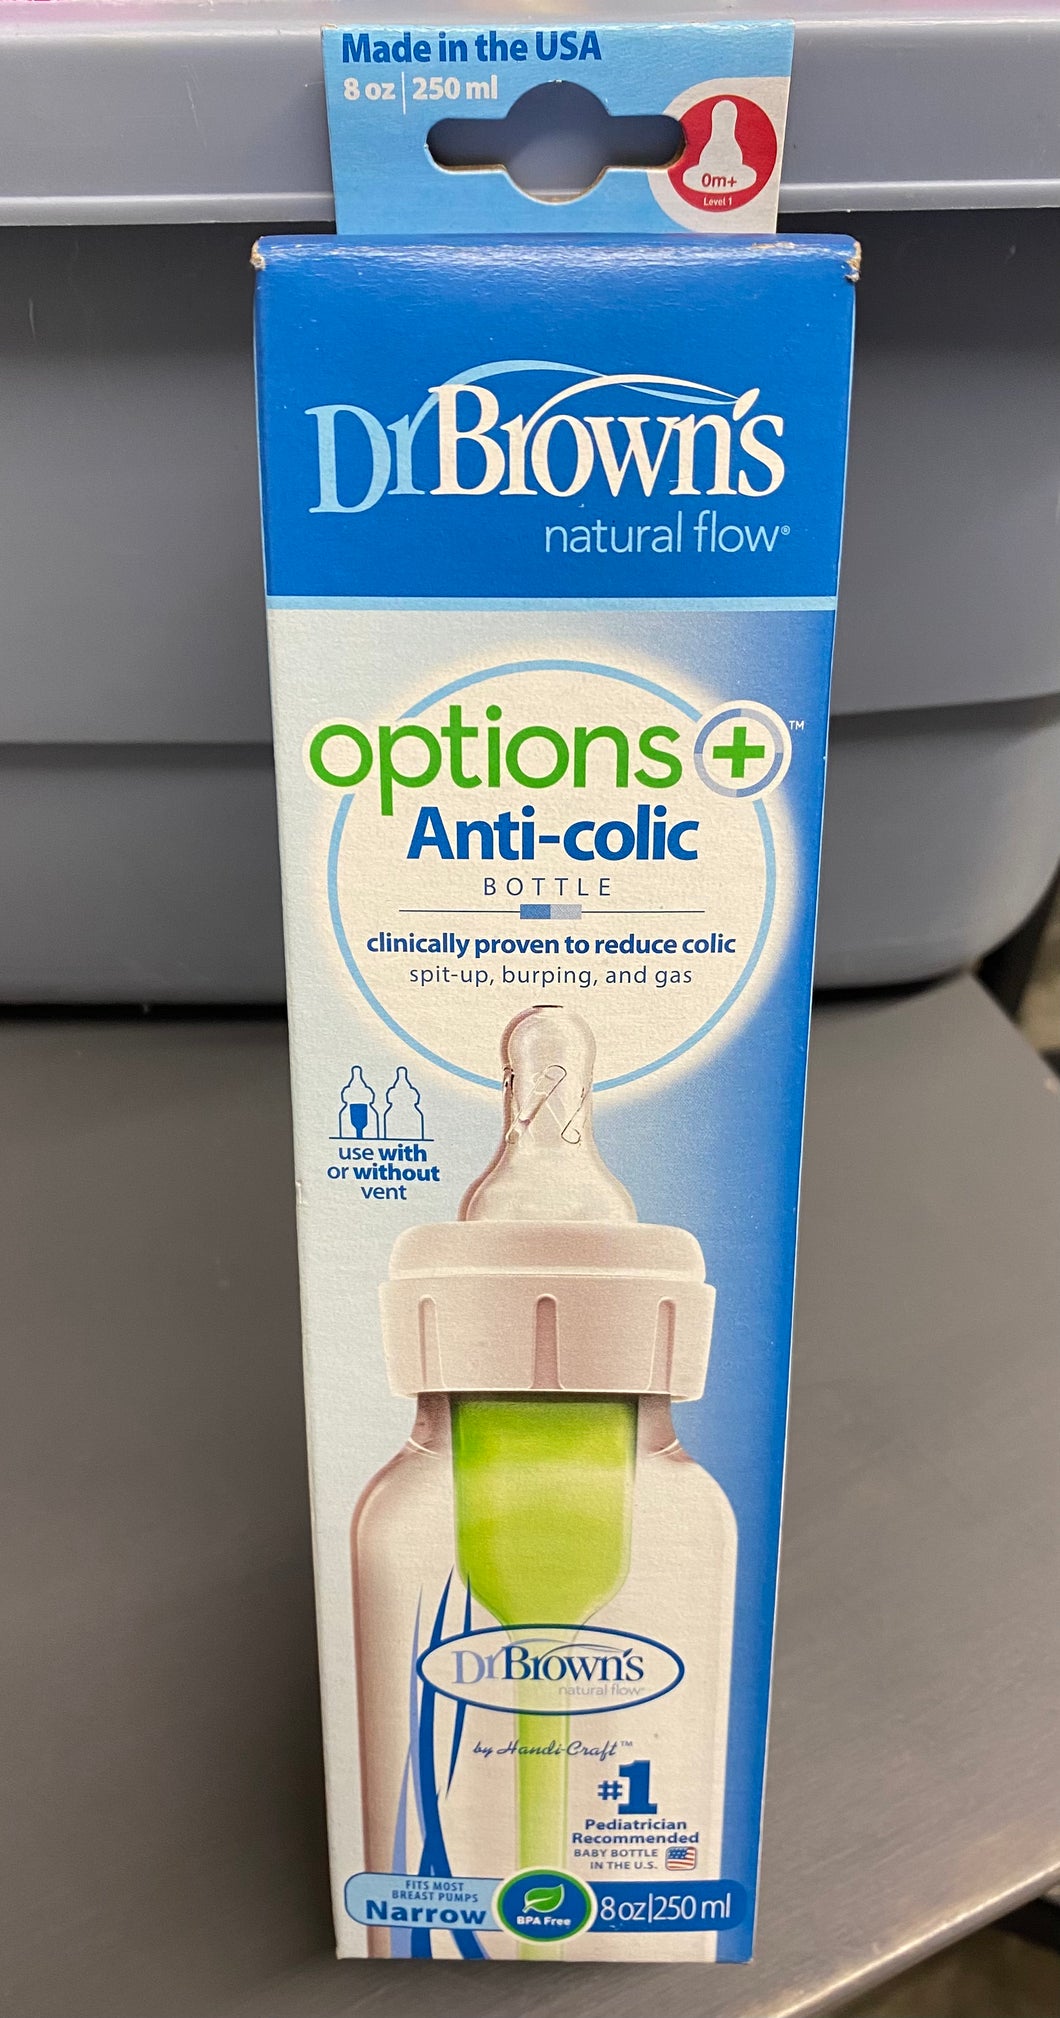 Dr.Browns Narrow Anti-Colic Bottle